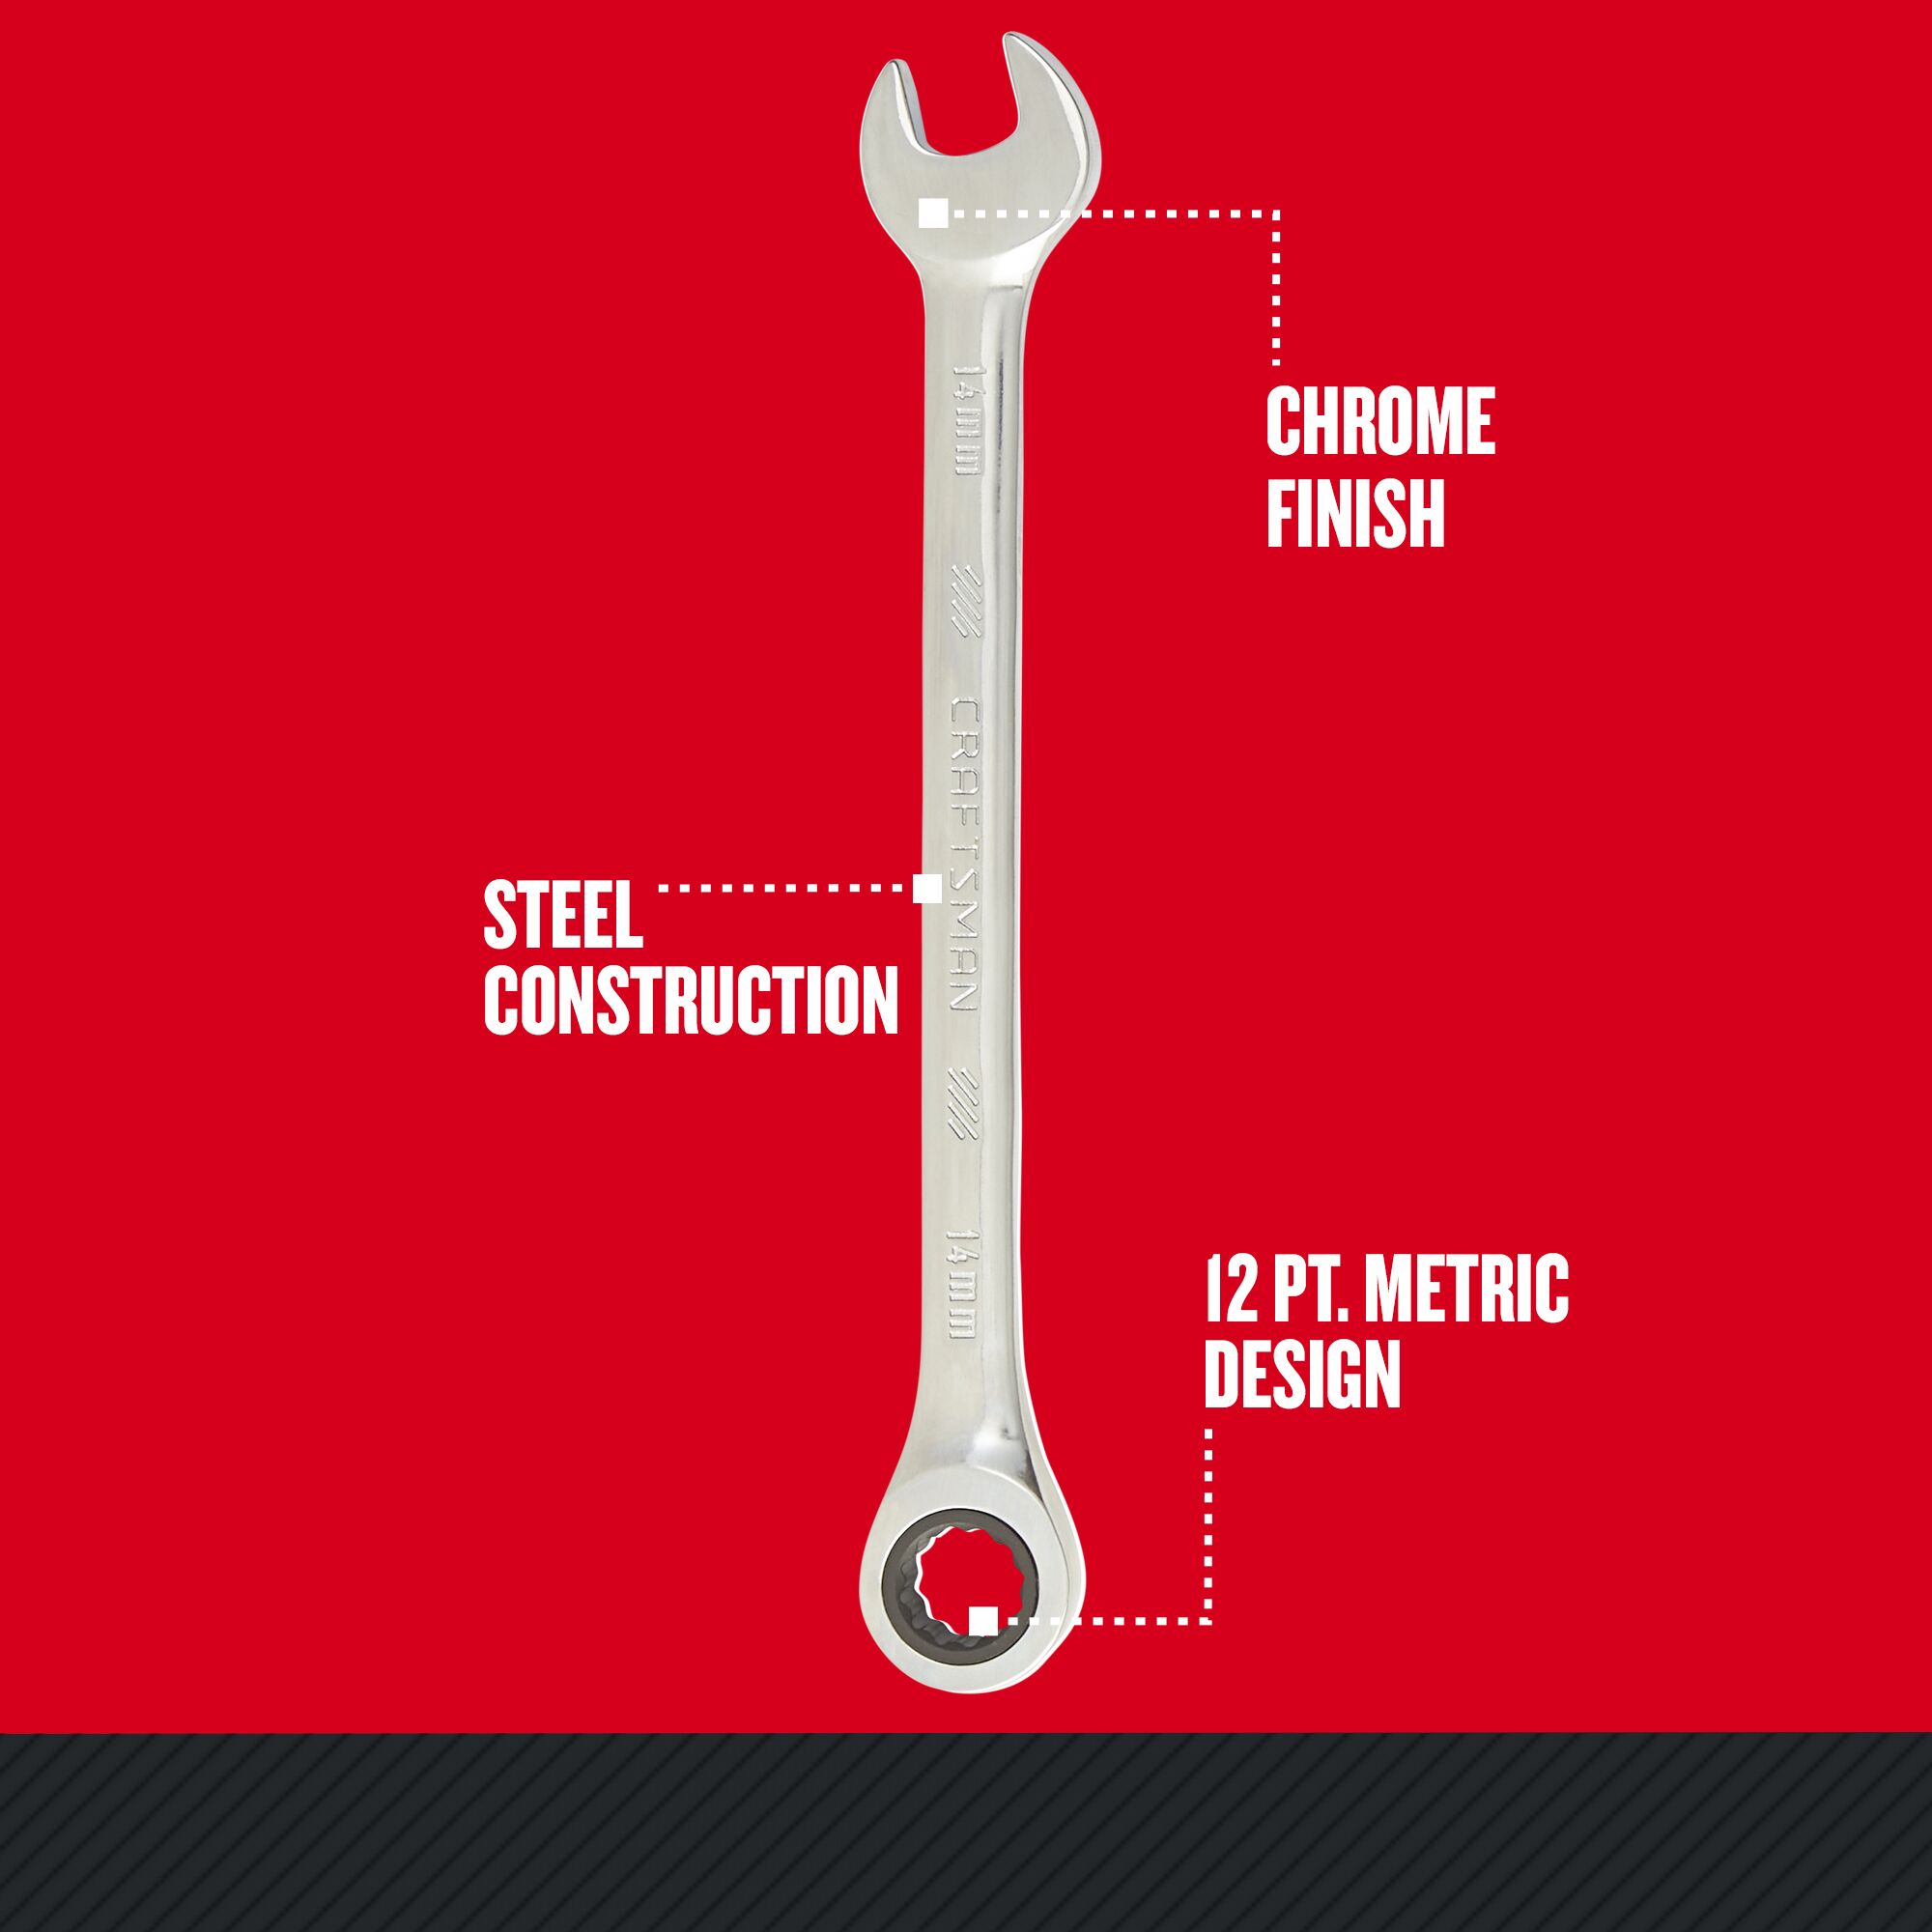 Upright front view of Craftsman 12 pt. Metric Ratchet Wrench showing Chrome Finish, Steel Construction, and 12 pt. Metric Design